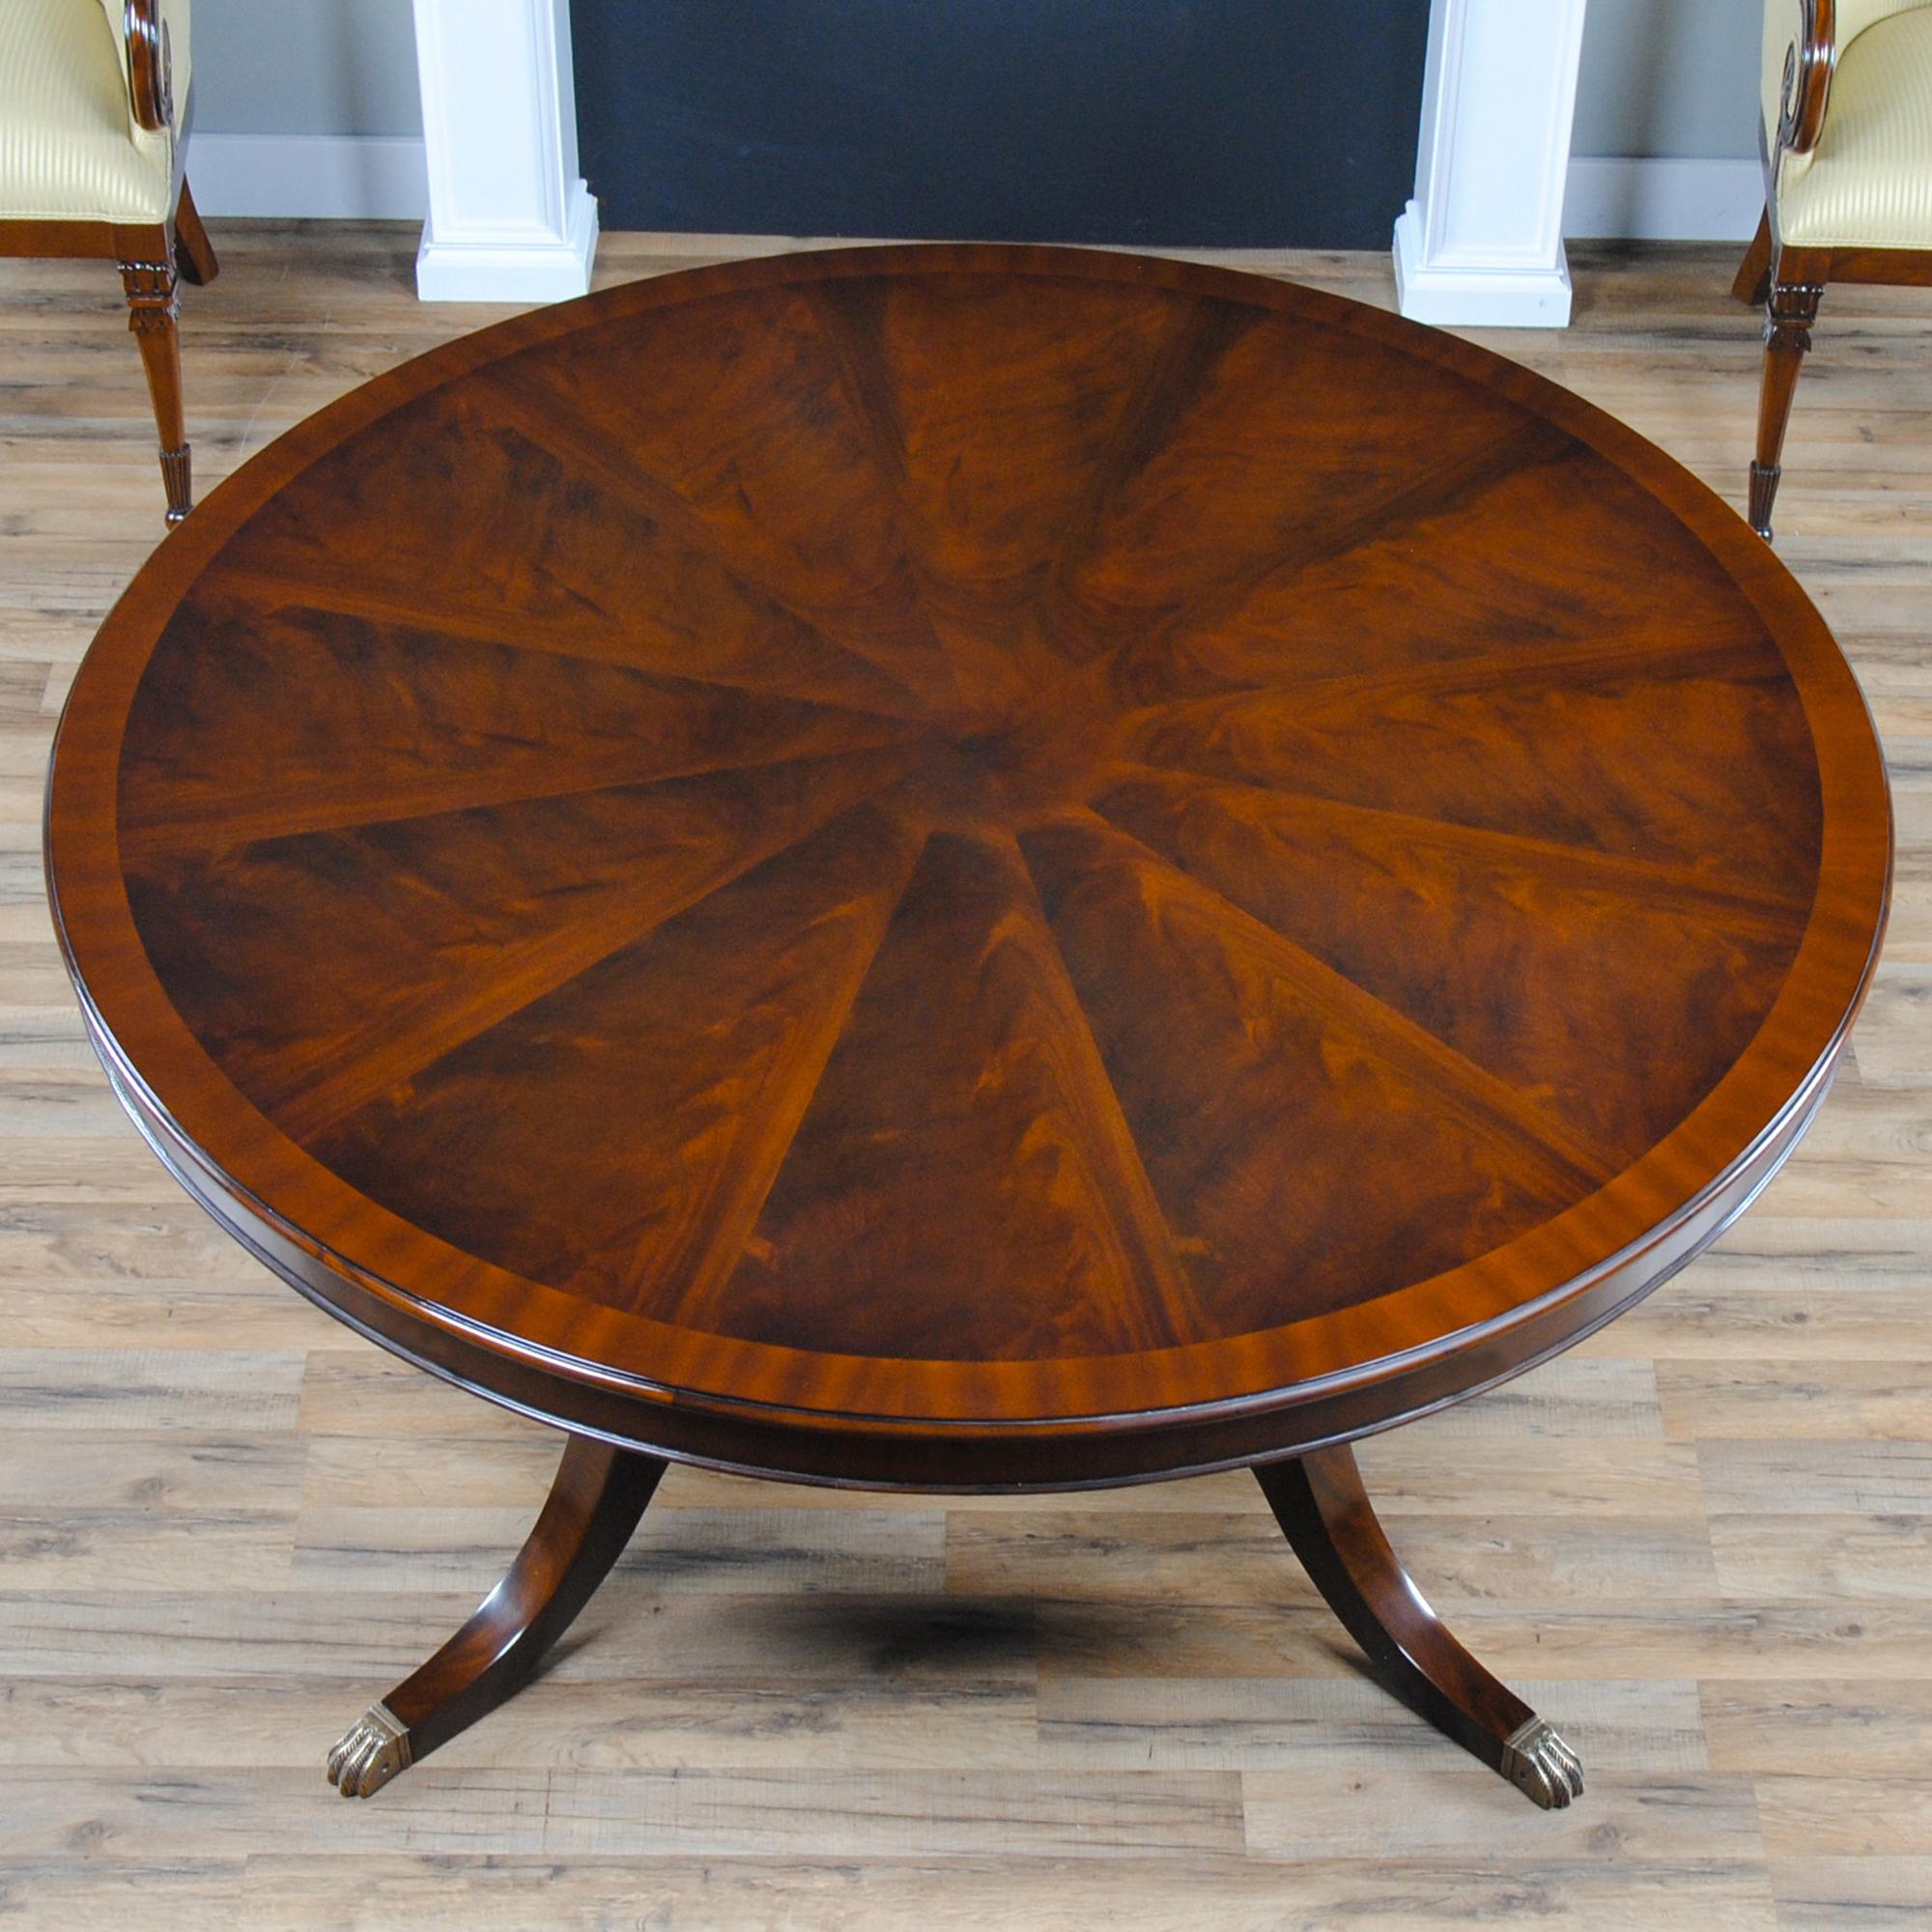 A Sixty Inch Round Mahogany Dining Table is produced with a high quality figured mahogany field and sapele banding makes for a subtle but interesting contrast in the pattern on the top.  The elegant base of the Sixty Inch Round Mahogany Dining Table